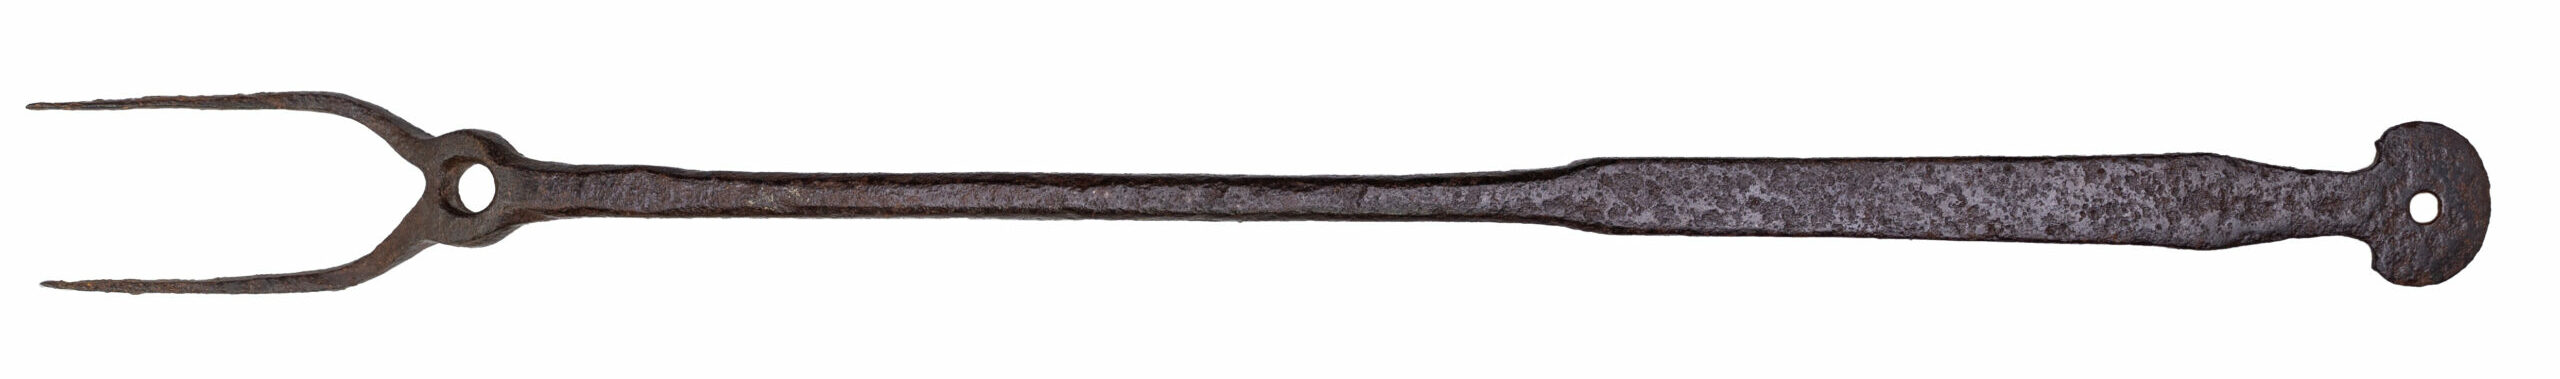 A late 17th – early 18th century flesh fork. The function of the hole near the base is uncertain: one possibility is that the fork was intended to fit onto a stand of some kind.